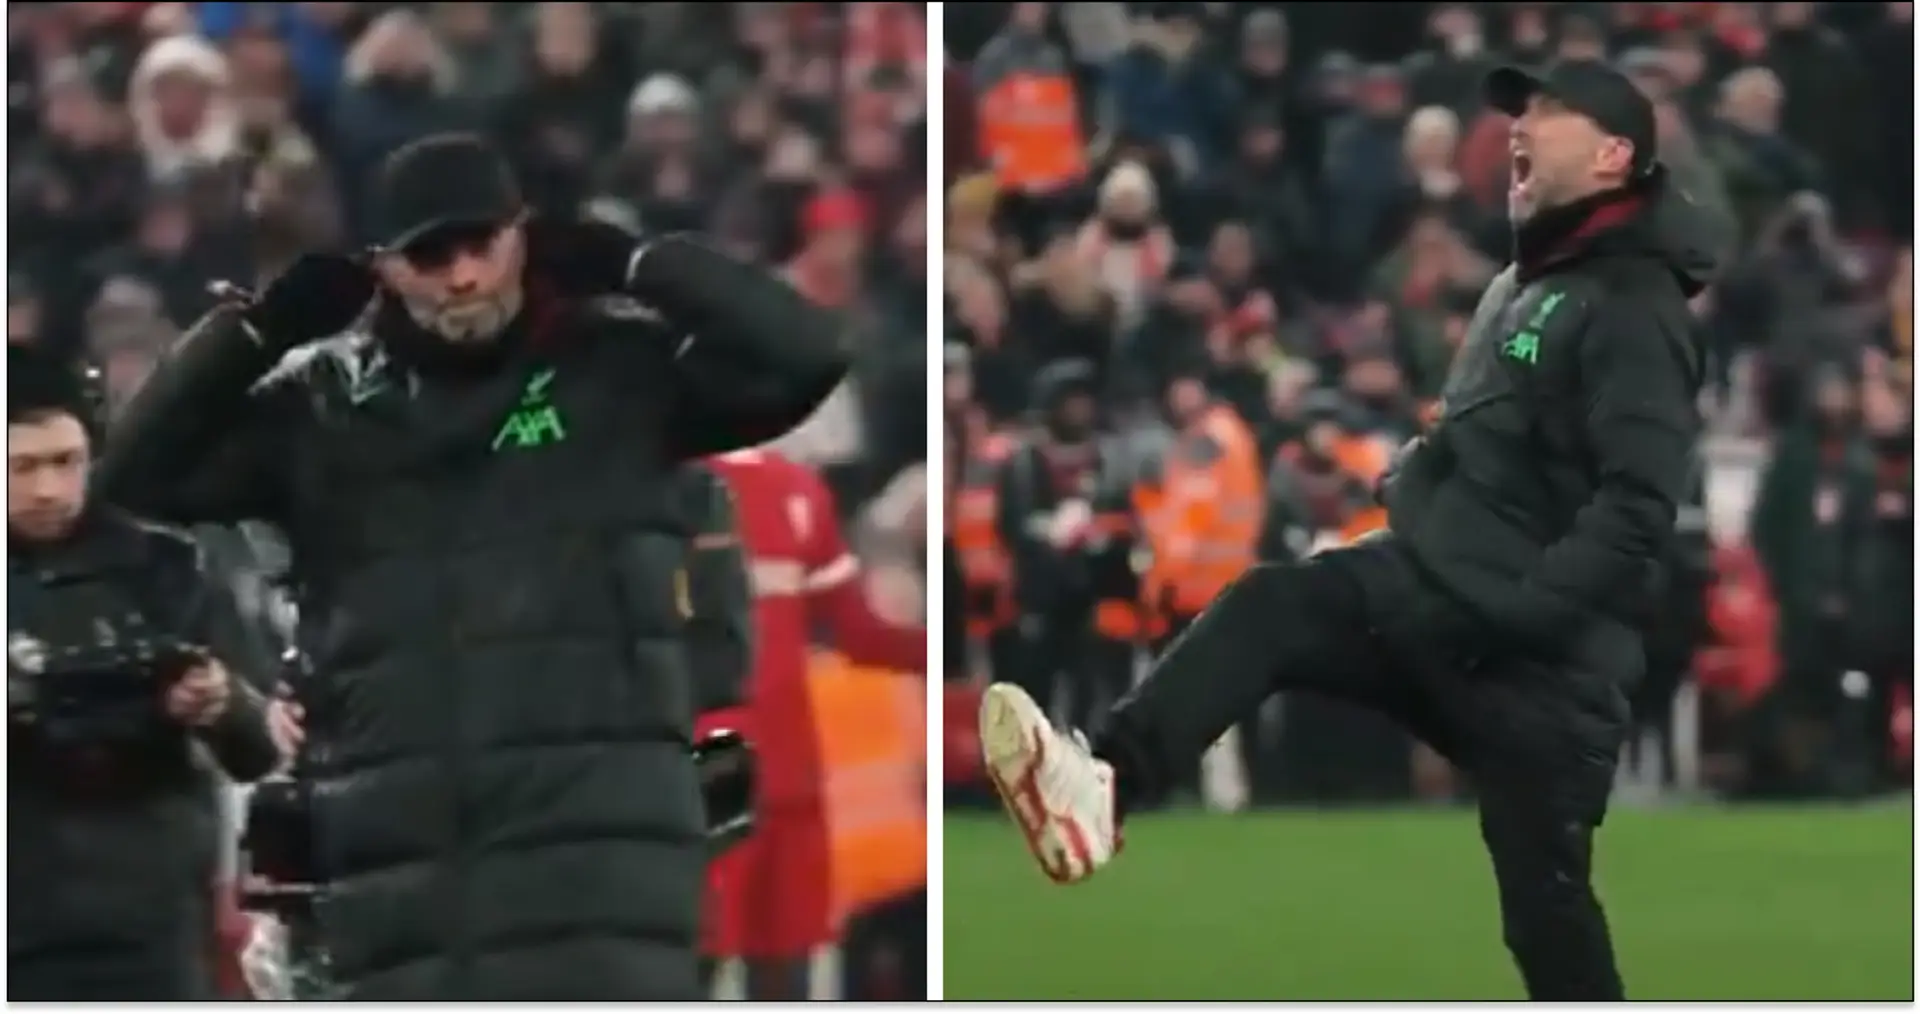 Fist pumps are back: Klopp's reaction to Fulham win caught on camera